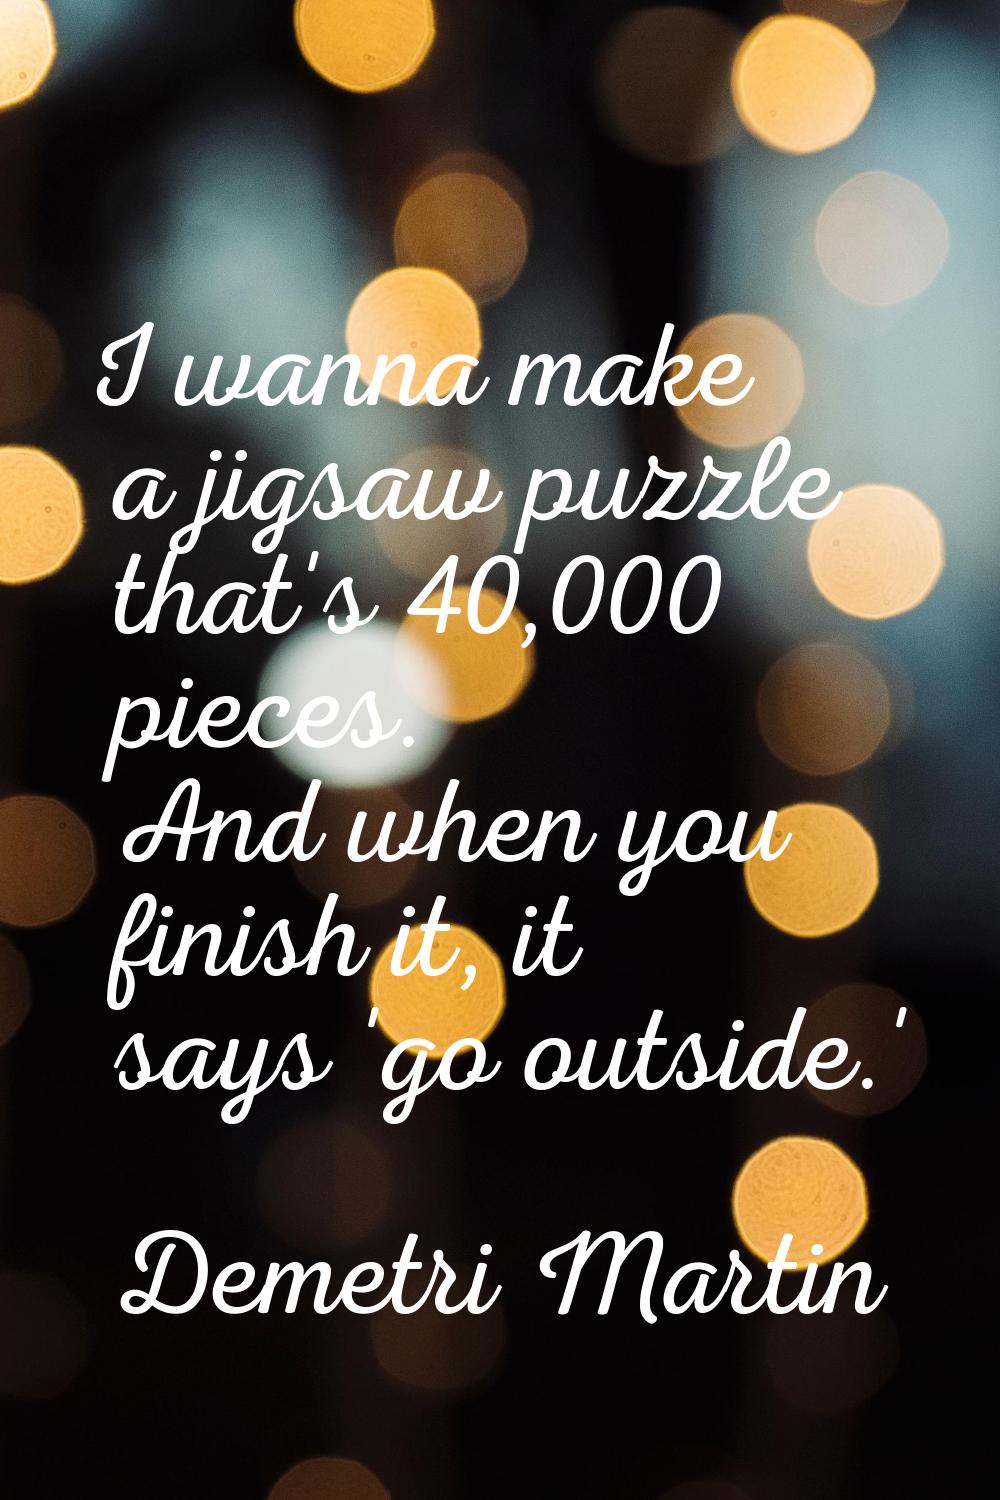 I wanna make a jigsaw puzzle that's 40,000 pieces. And when you finish it, it says 'go outside.'